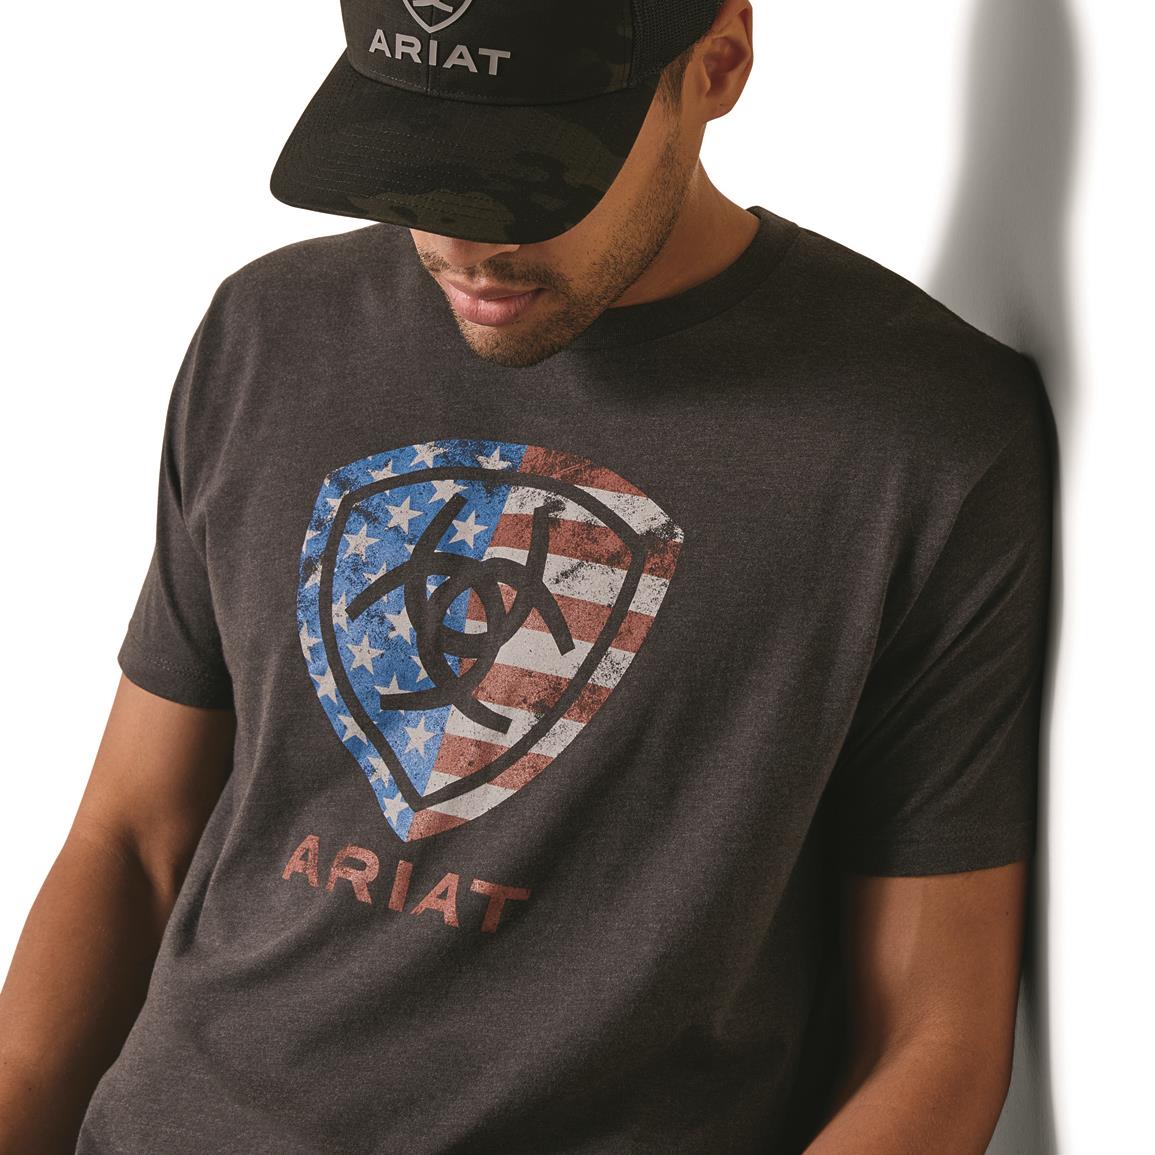 Ariat American Shield T-Shirt, Charcoal Heather